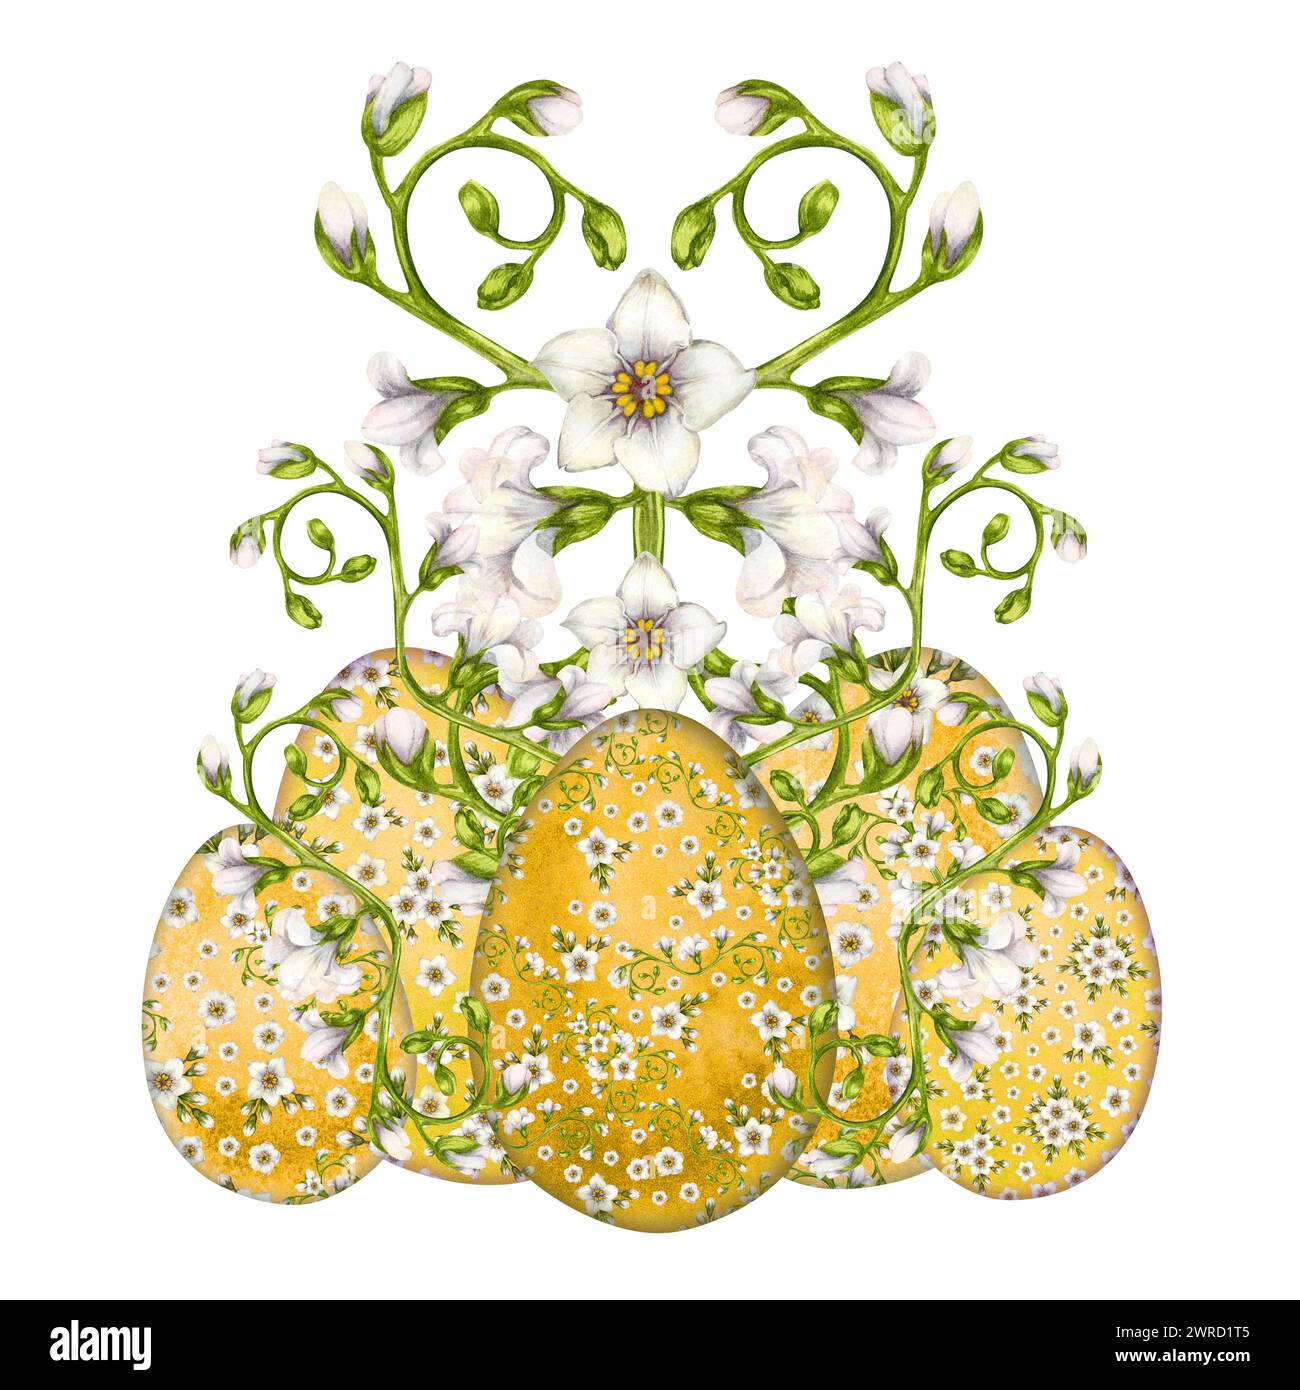 Watercolor Easter yellow egg with floral pattern of spring blooming primroses for Easter clipart, cards, invitations, stickers, scrapbooking, borders, Stock Photo